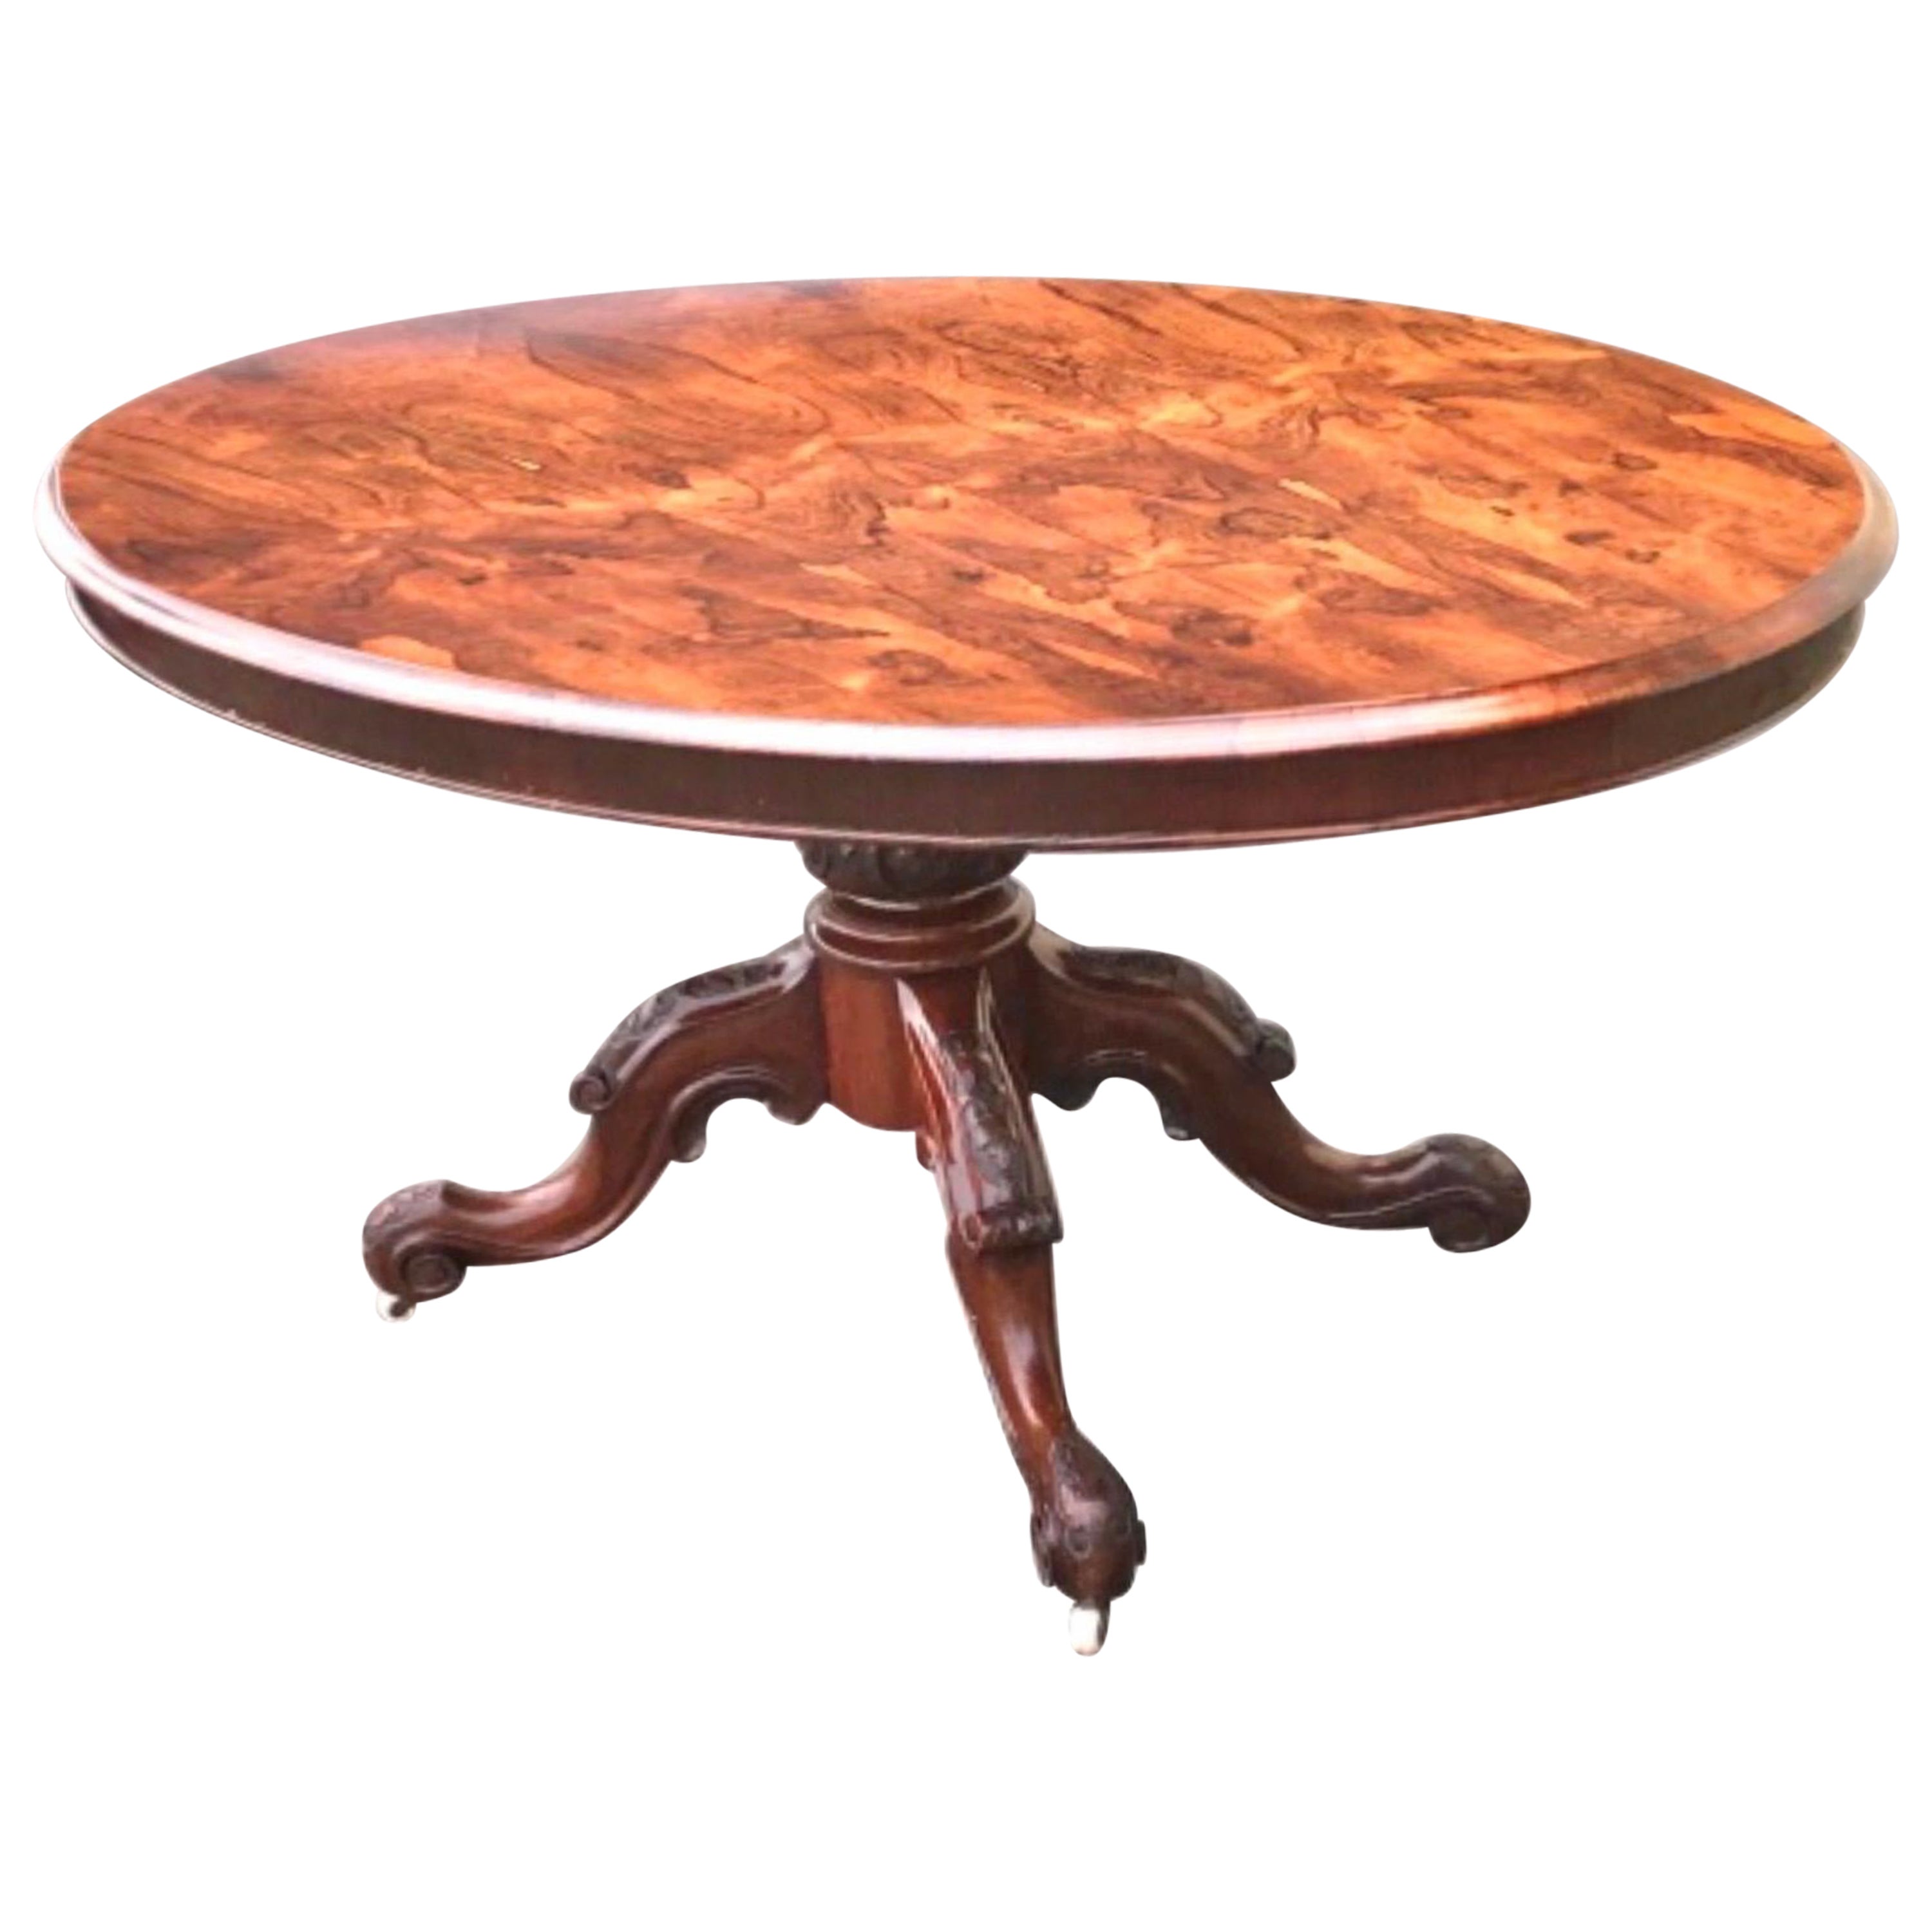 Antique Early Victorian Oval Rosewood Centre Pedestal Hall,Breakfast Loo Table